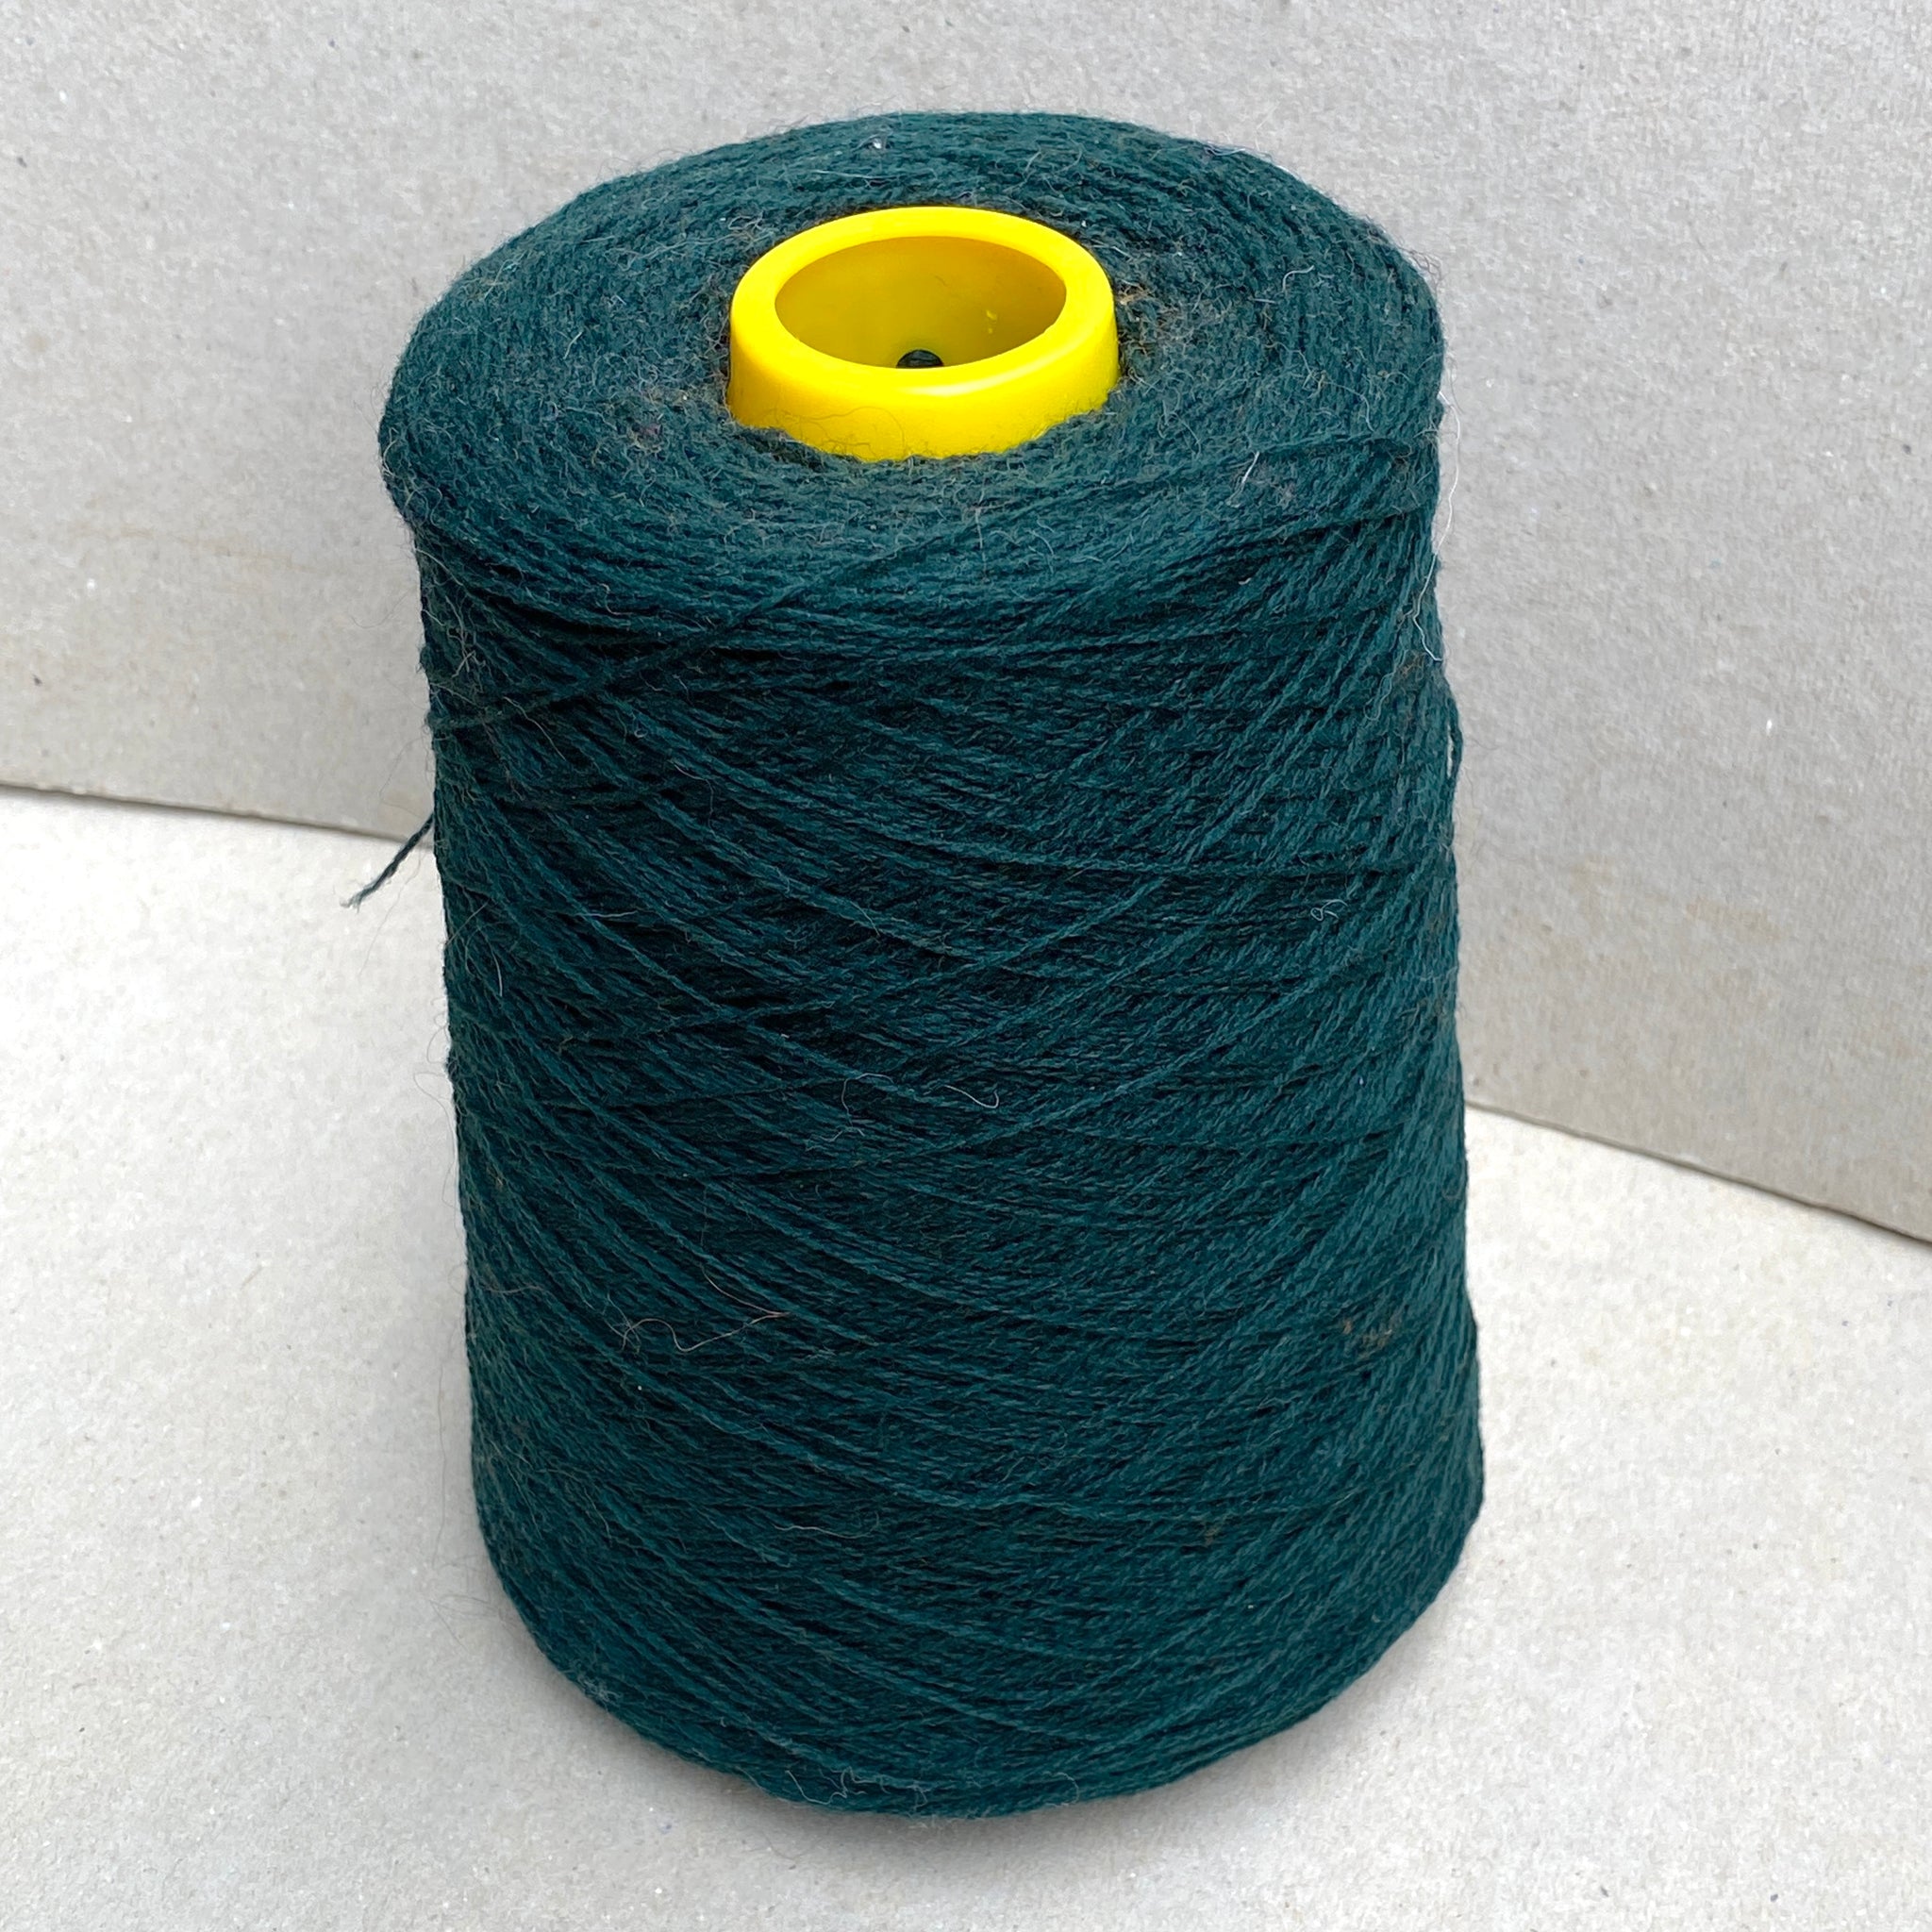 2 Ply Lambswool - Forest Weed